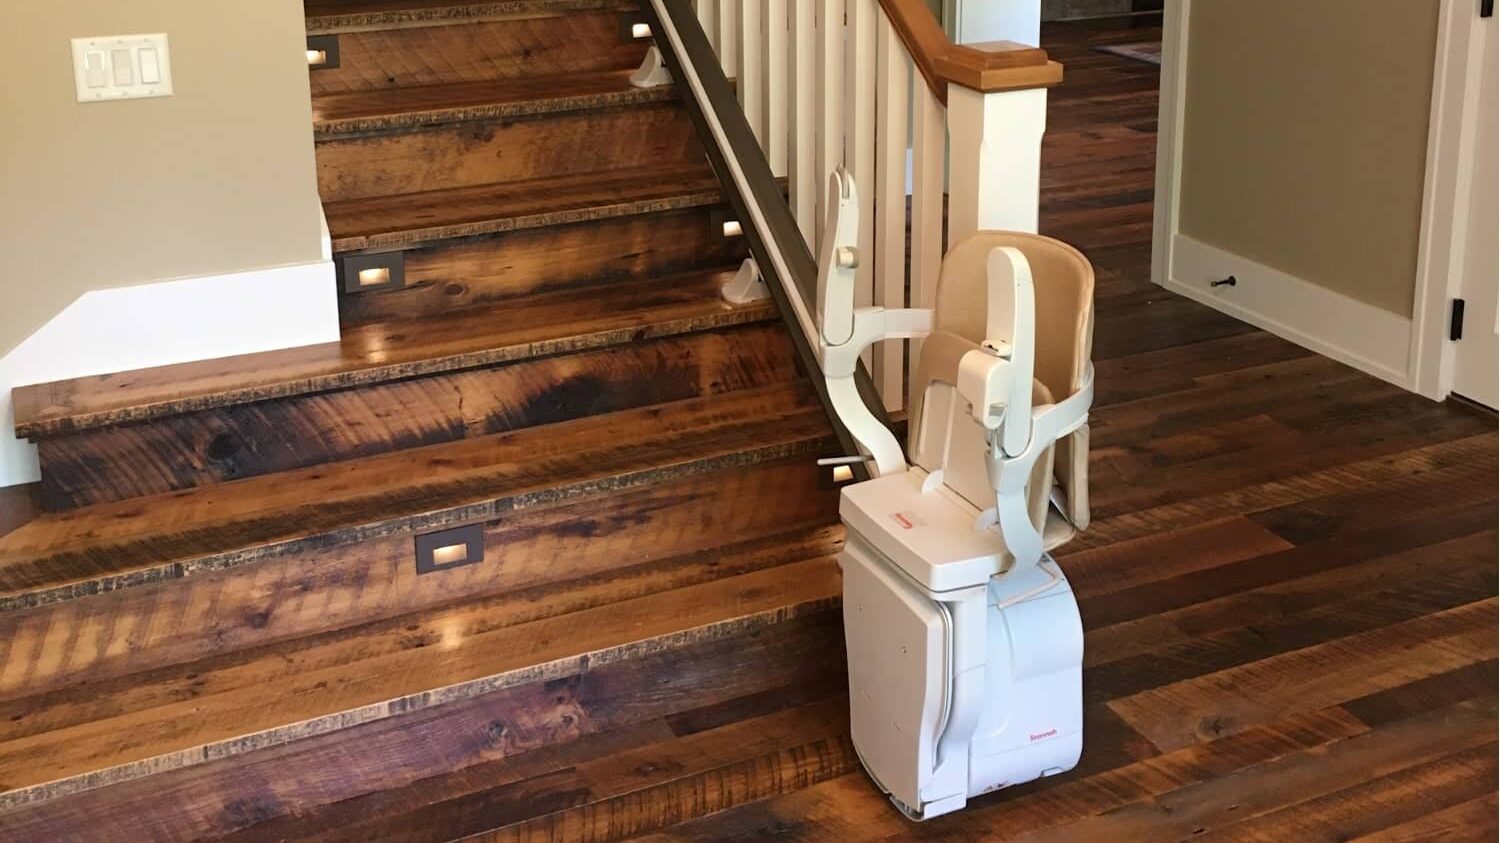 Stair lift parked at base of wood stairs, folded up for storage